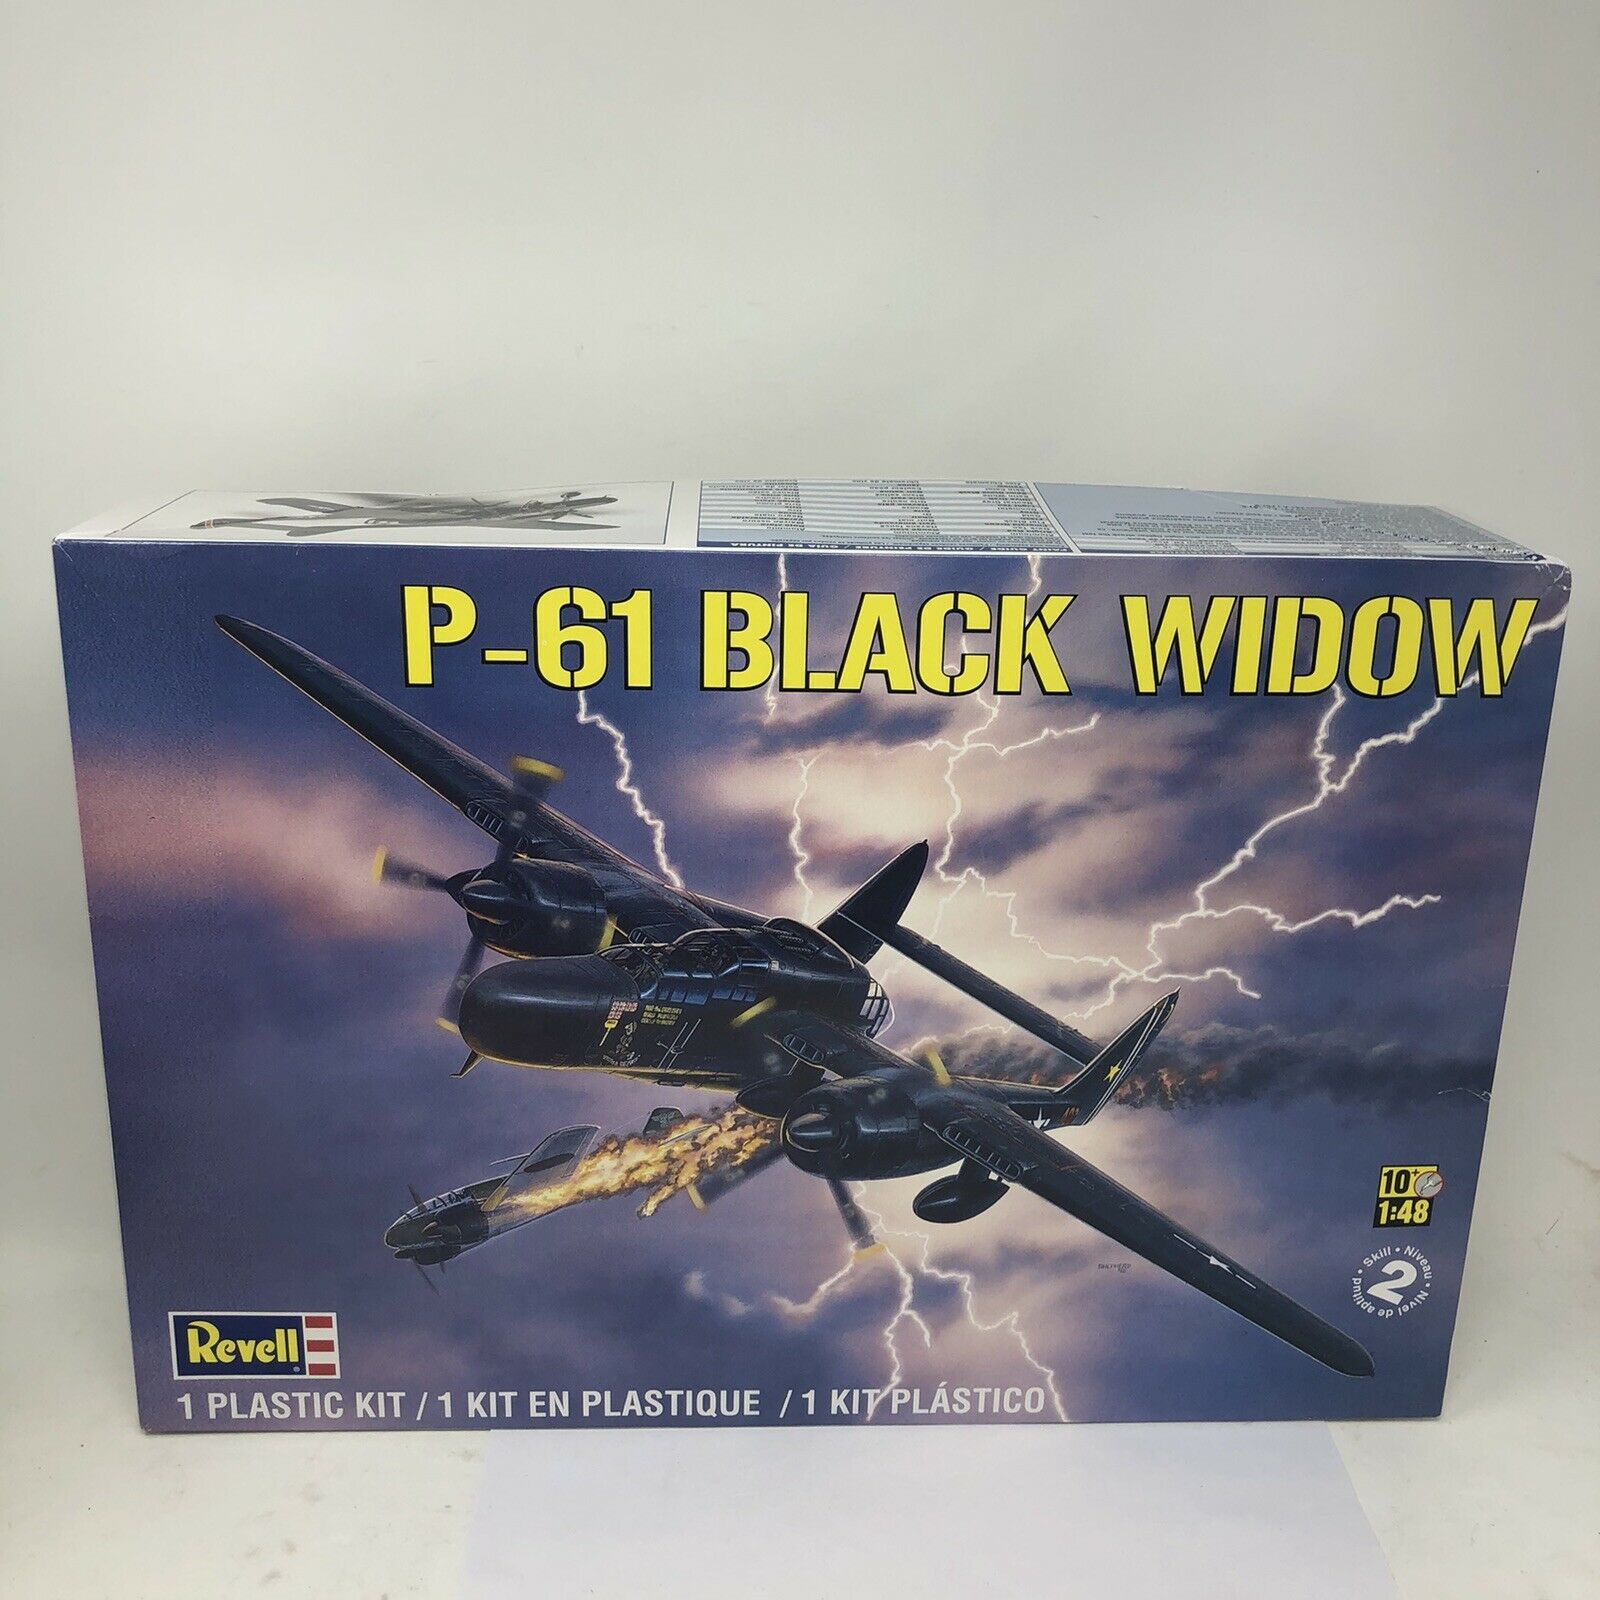 Primary image for Revell P-61 Black Widow 1/48 Scale Plastic Model Kit